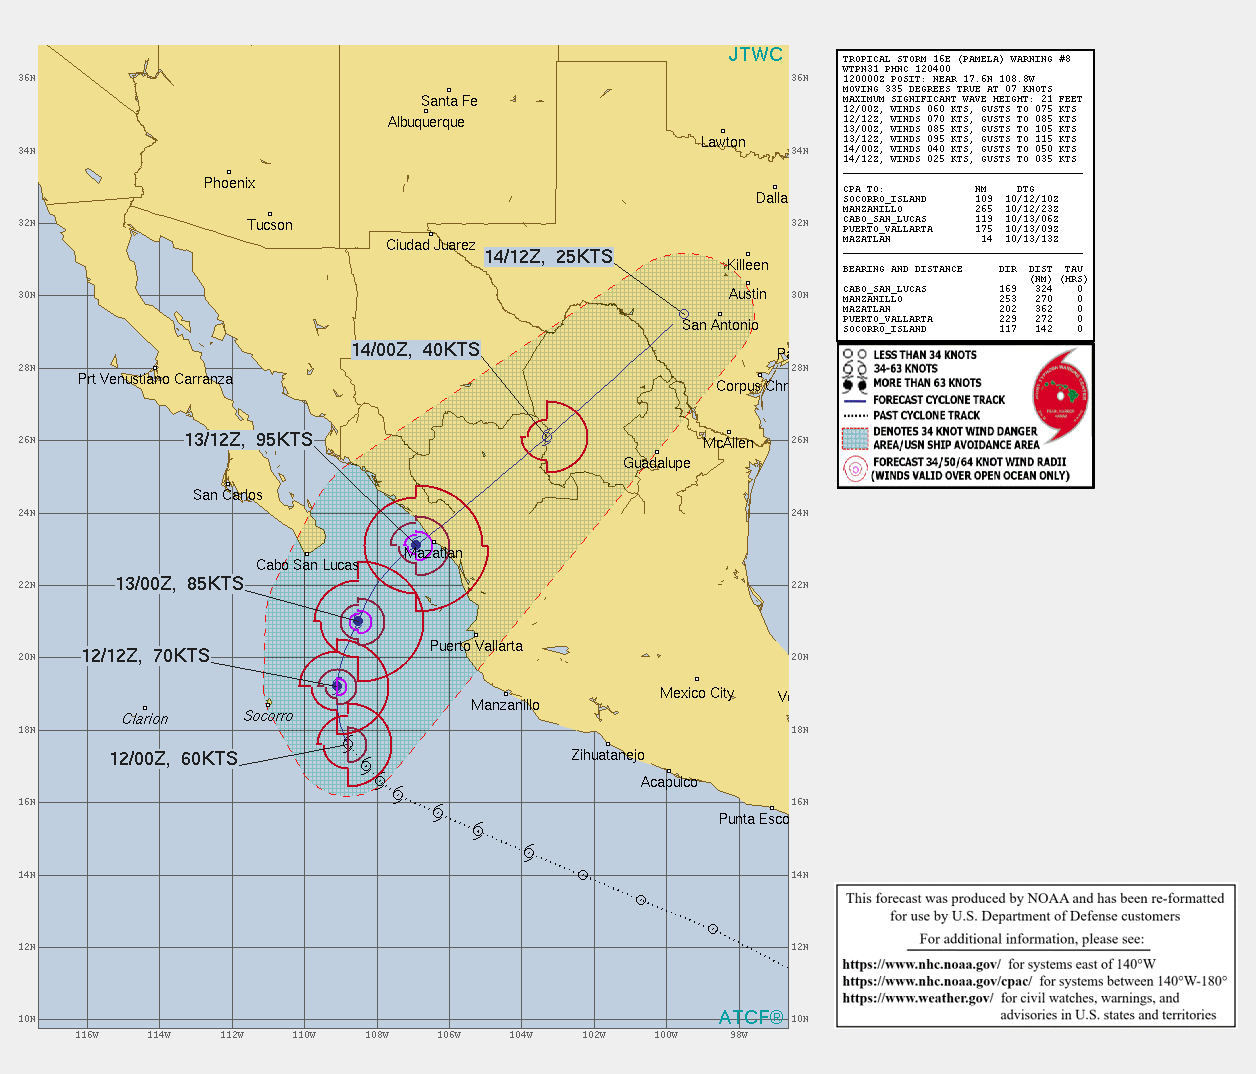 CURRENT INTENSITY IS 60KNOTS AND IS FORECAST TO PEAK AT 95KNOTS/CAT 2 BY 13/12UTC CLOSE TO THE MEXICAN COASTLINE.